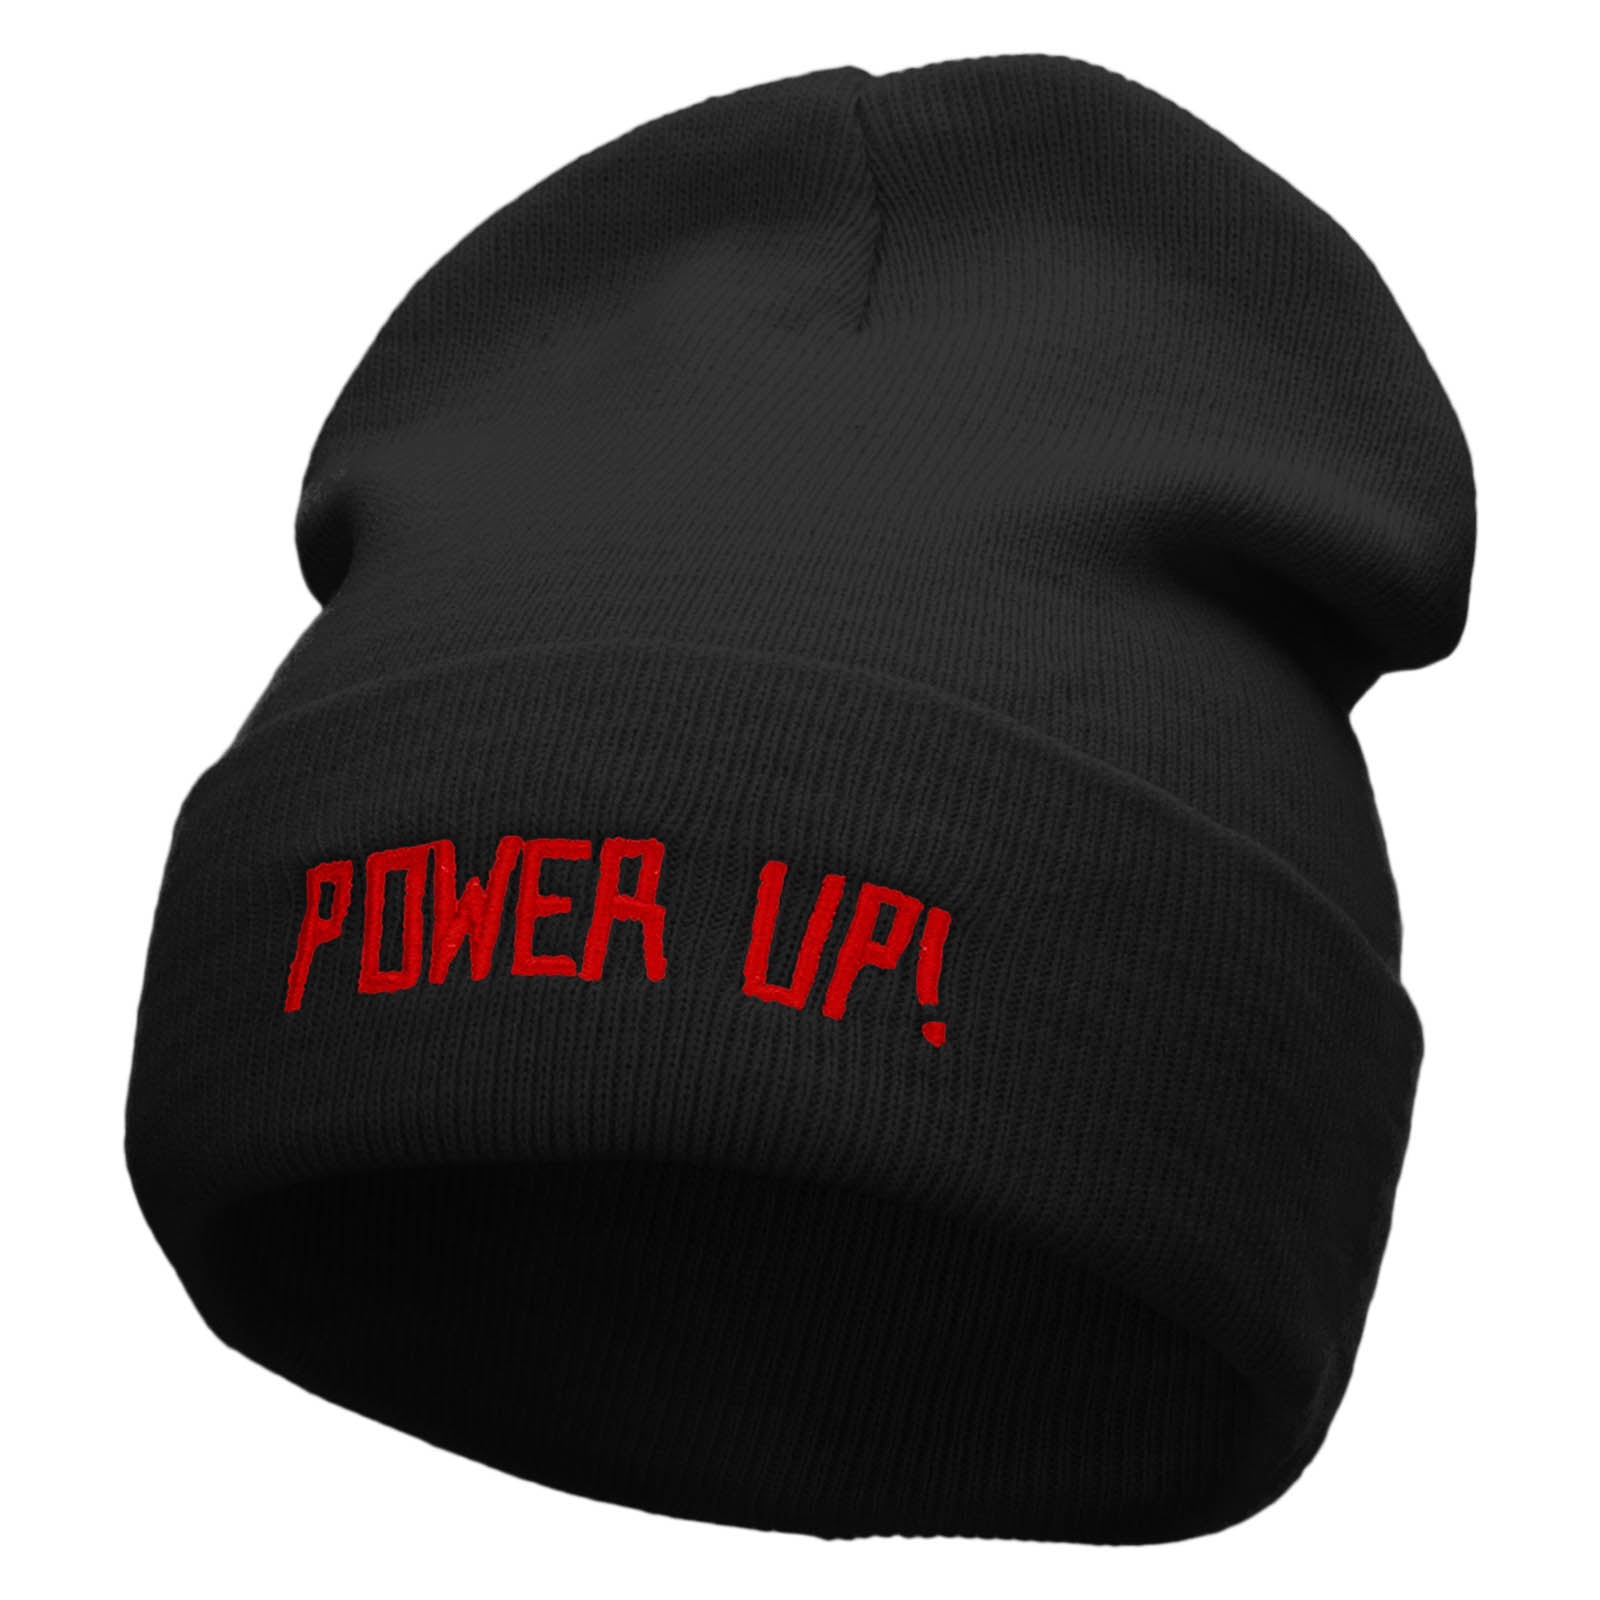 Power Up Embroidered 12 inch Acrylic Cuffed Long Beanie - Black OSFM